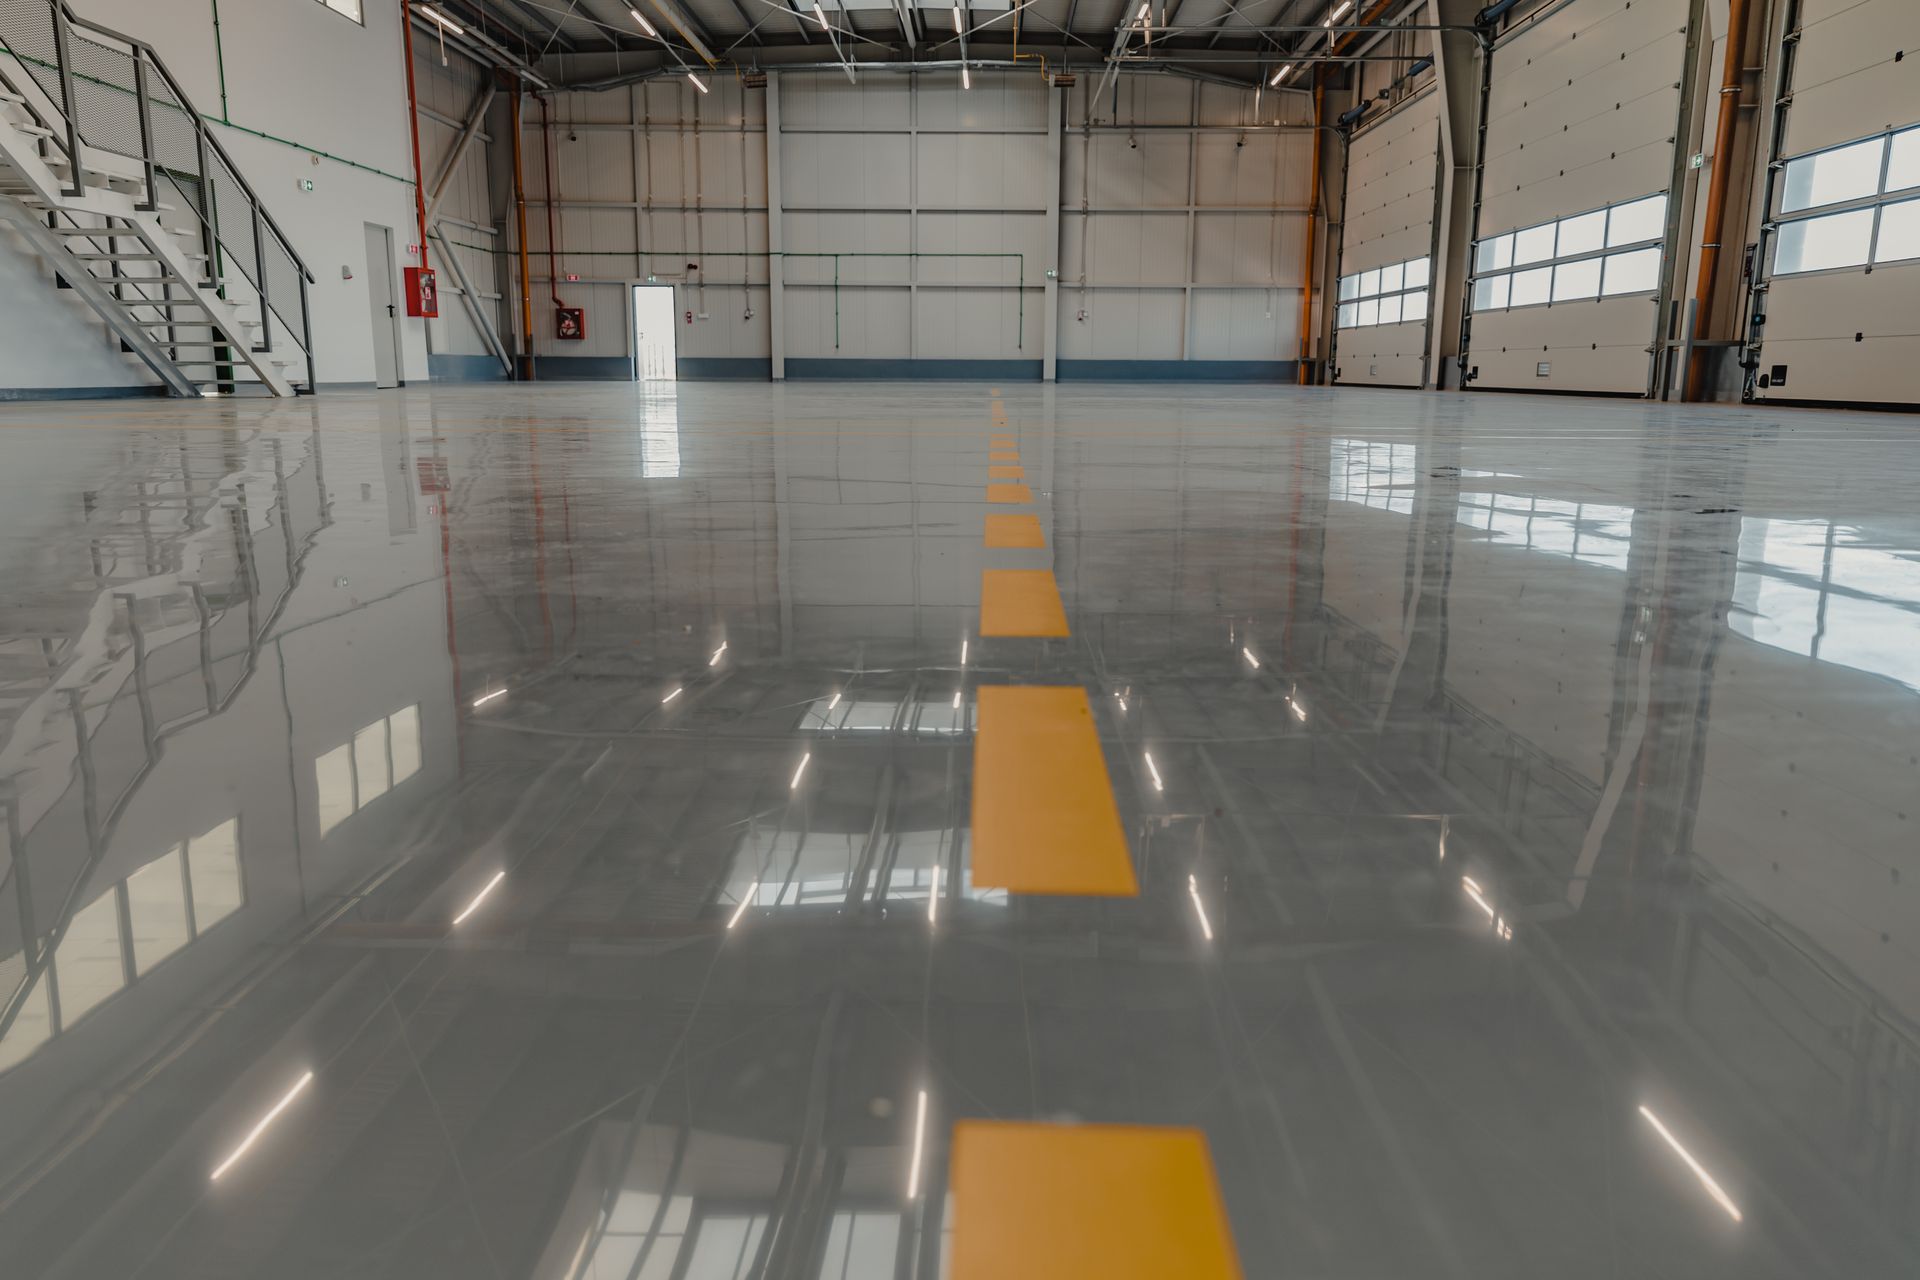 A large warehouse with a shiny concrete floor and a yellow line on the floor.